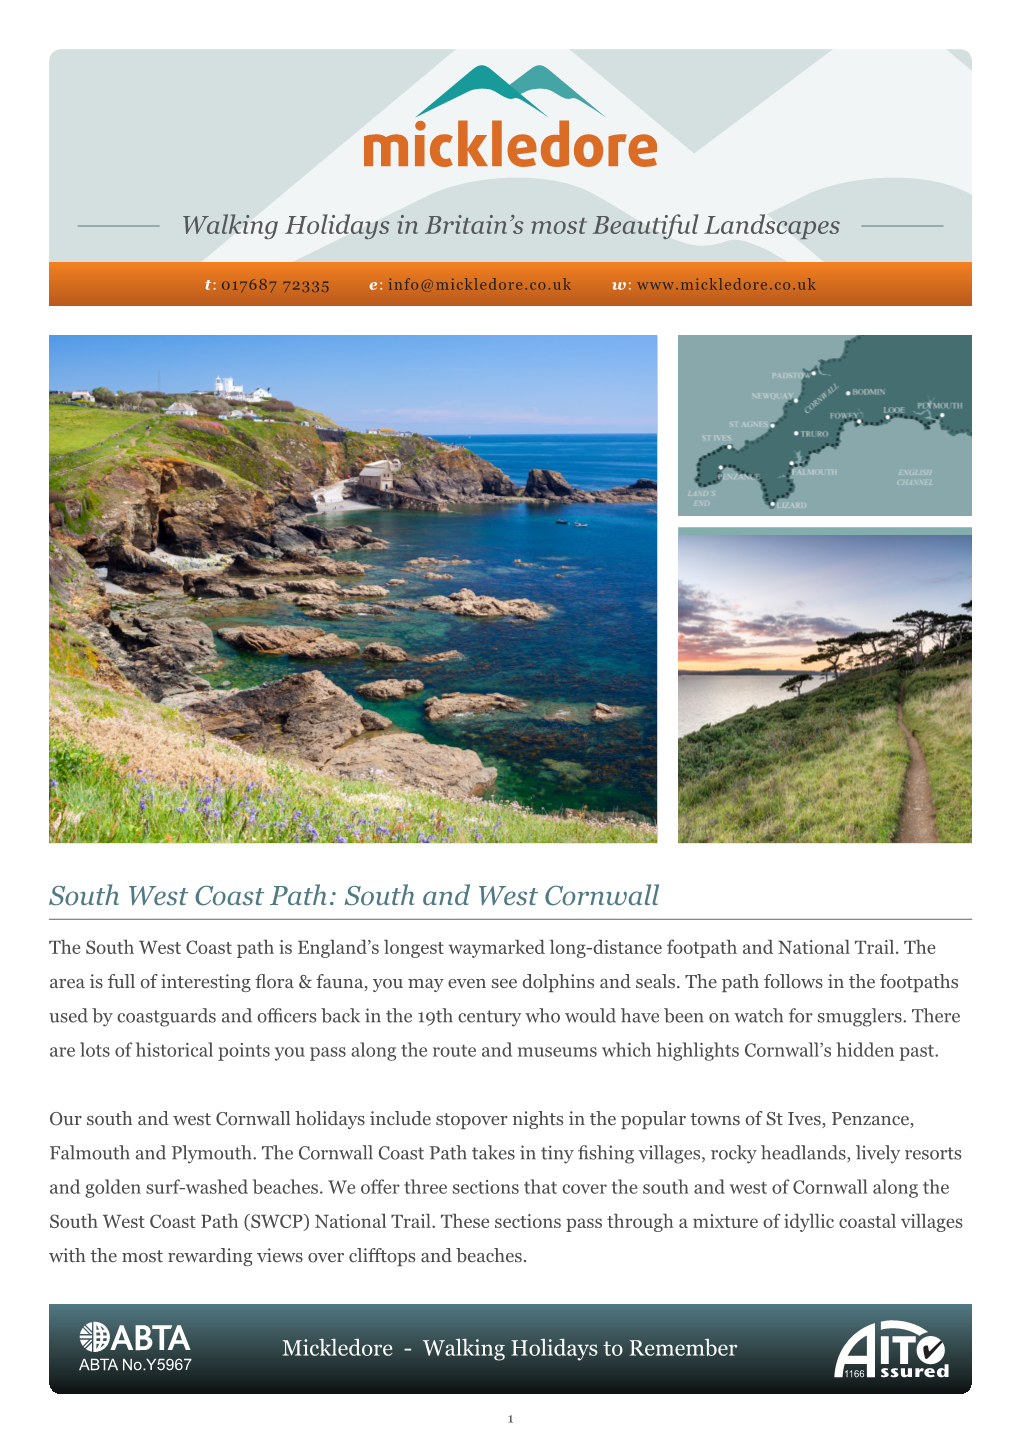 South West Coast Path: South and West Cornwall